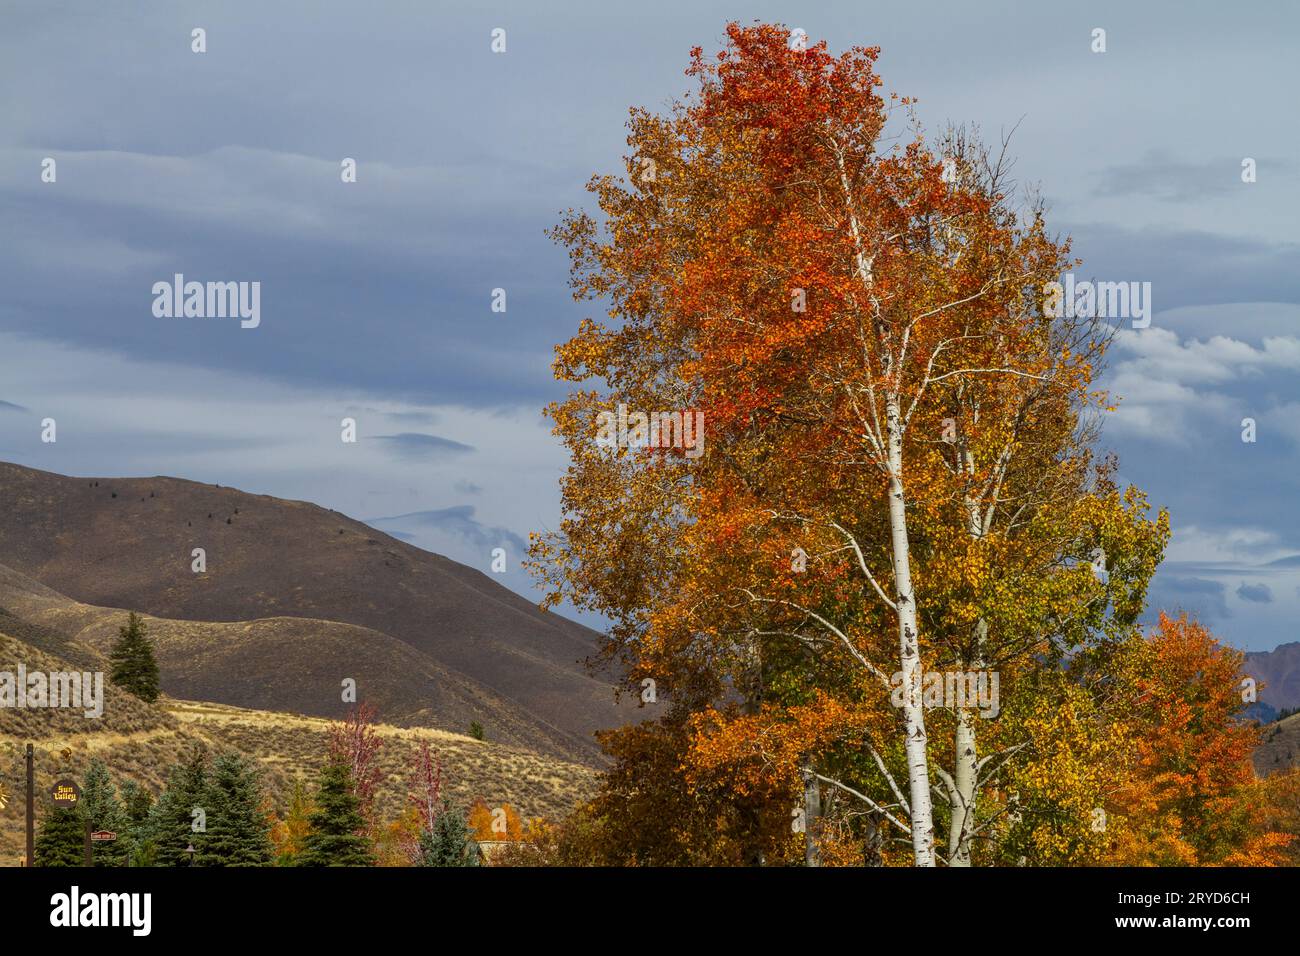 The bold fall colors of orange and yellow Quaking Aspens (Populus tremuloides) in Sun Valley, Idaho, USA, are popular with leaf peeping tourists. Stock Photo